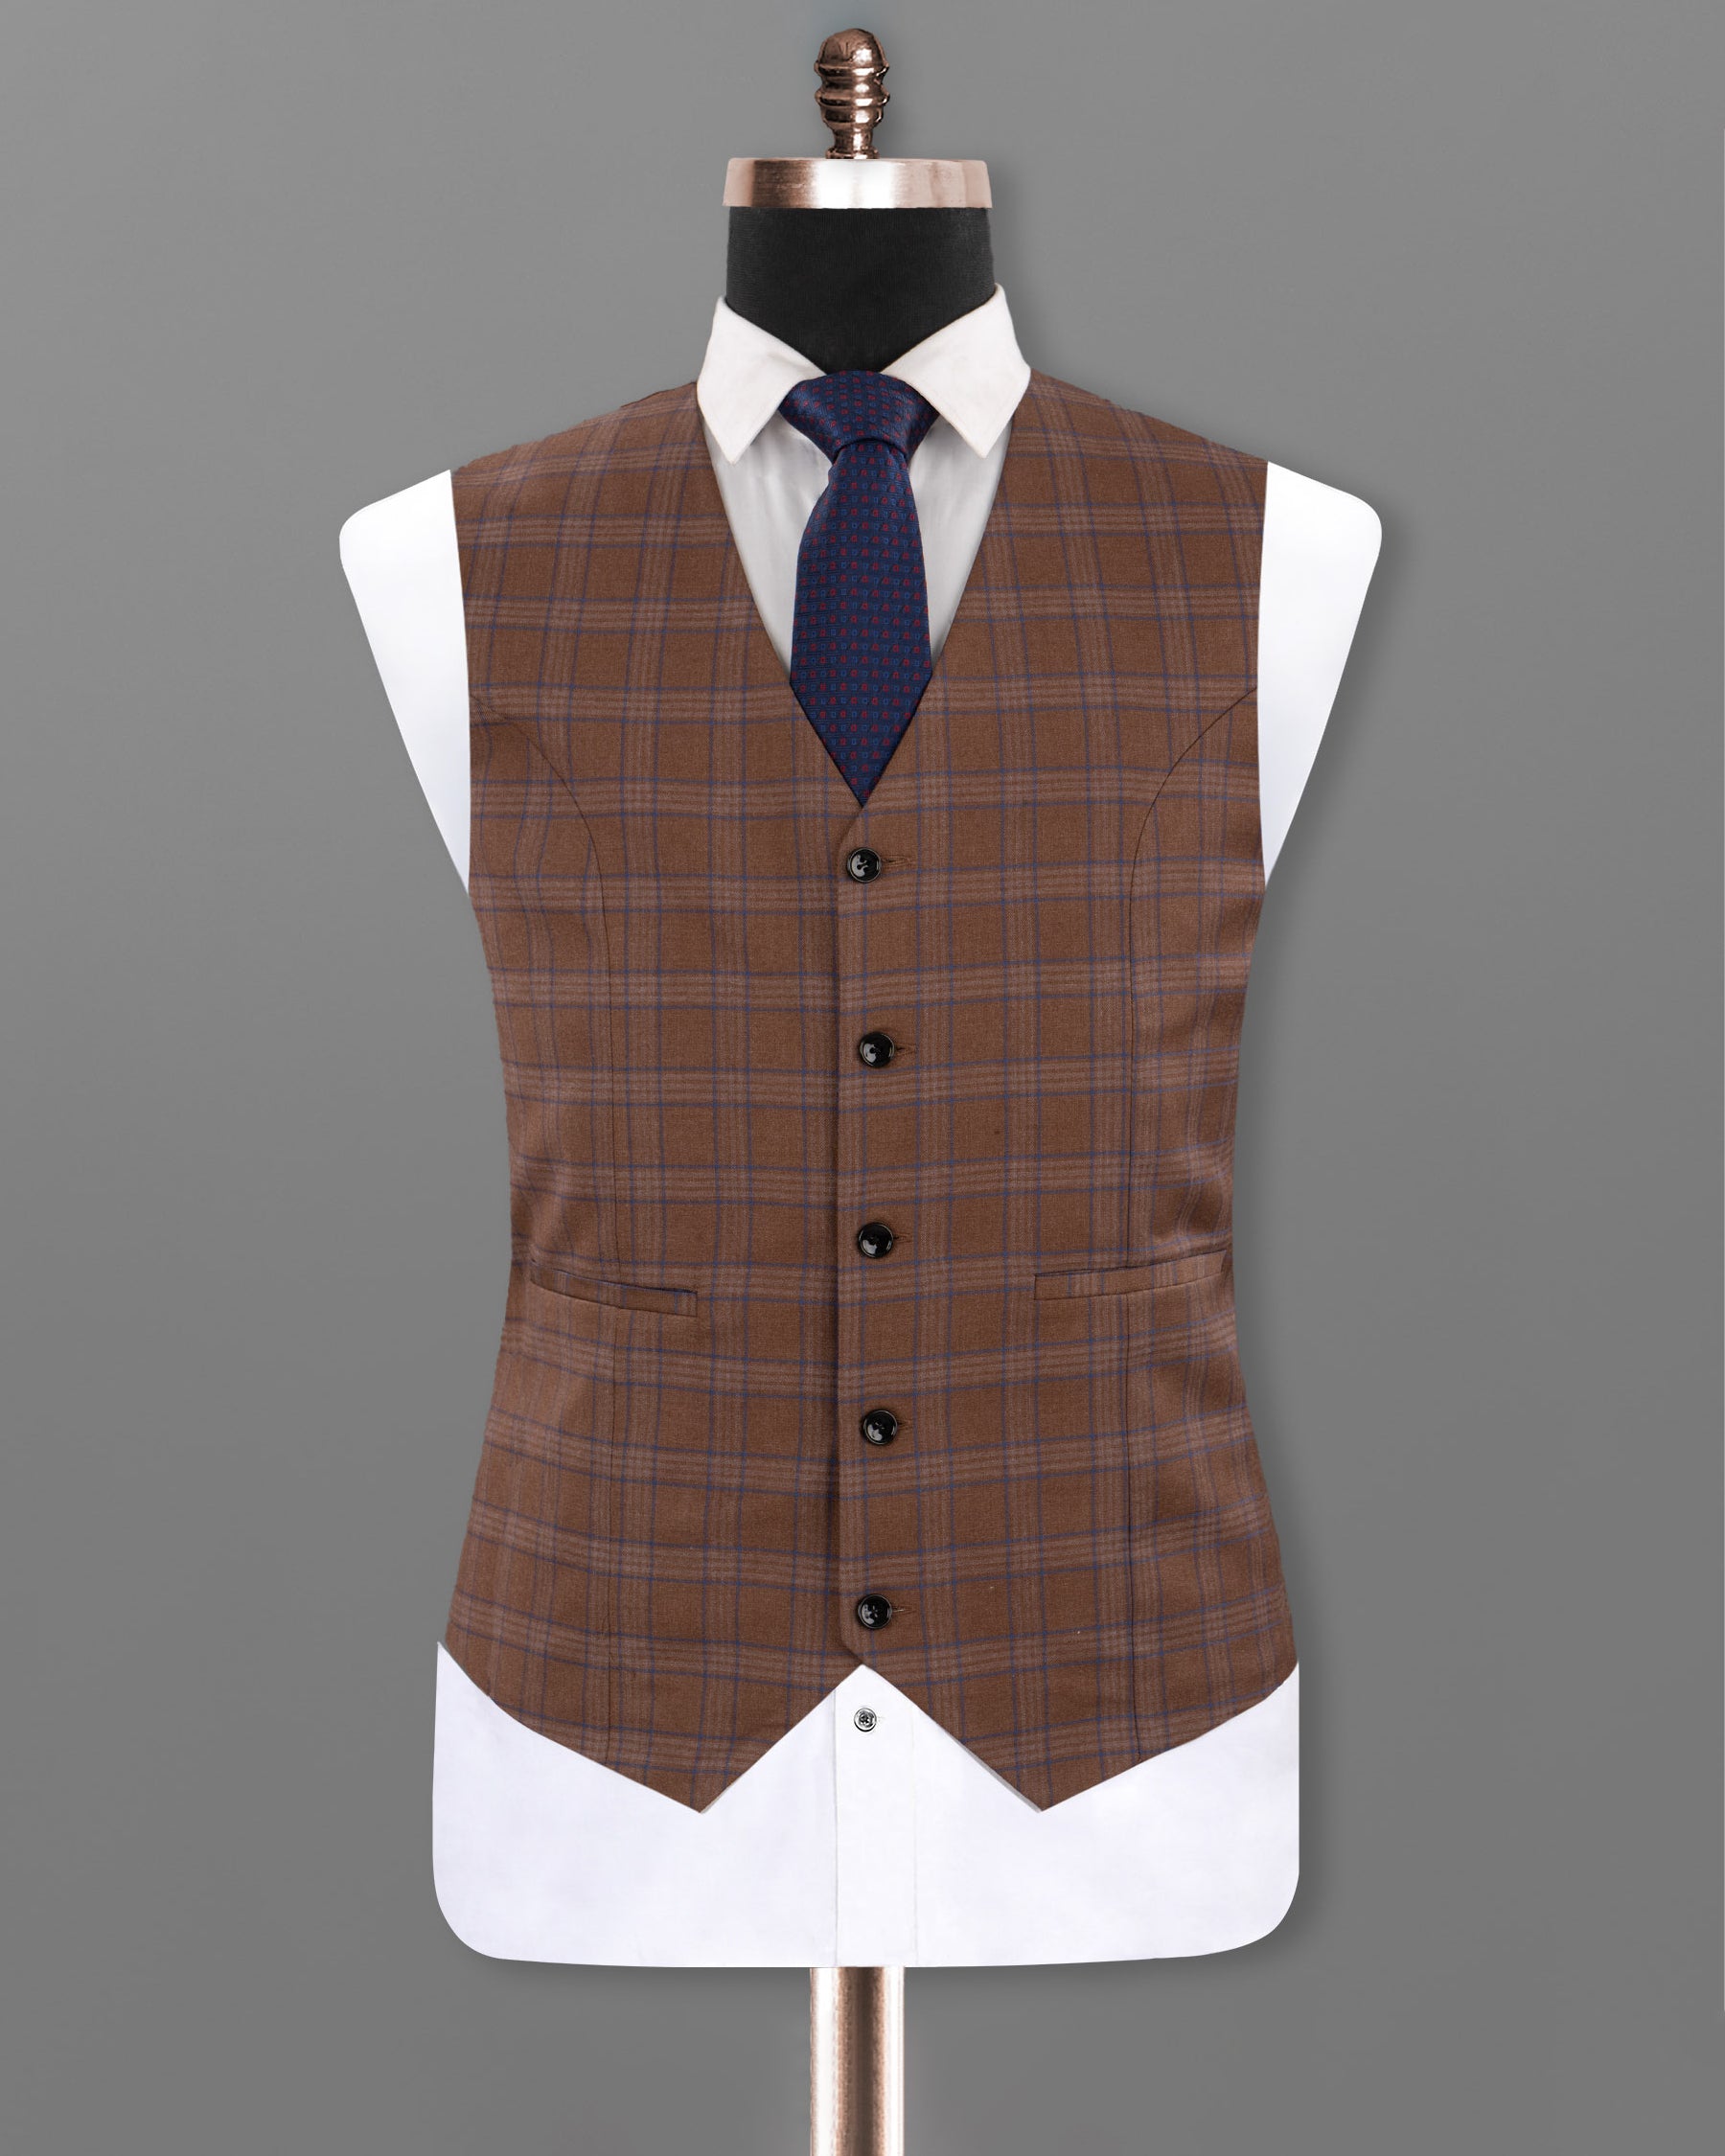 Old Copper Brown Plaid Woolrich Waistcoat V1216-52, V1216-54, V1216-56, V1216-58, V1216-60, V1216-50, V1216-36, V1216-38, V1216-40, V1216-42, V1216-44, V1216-46, V1216-48